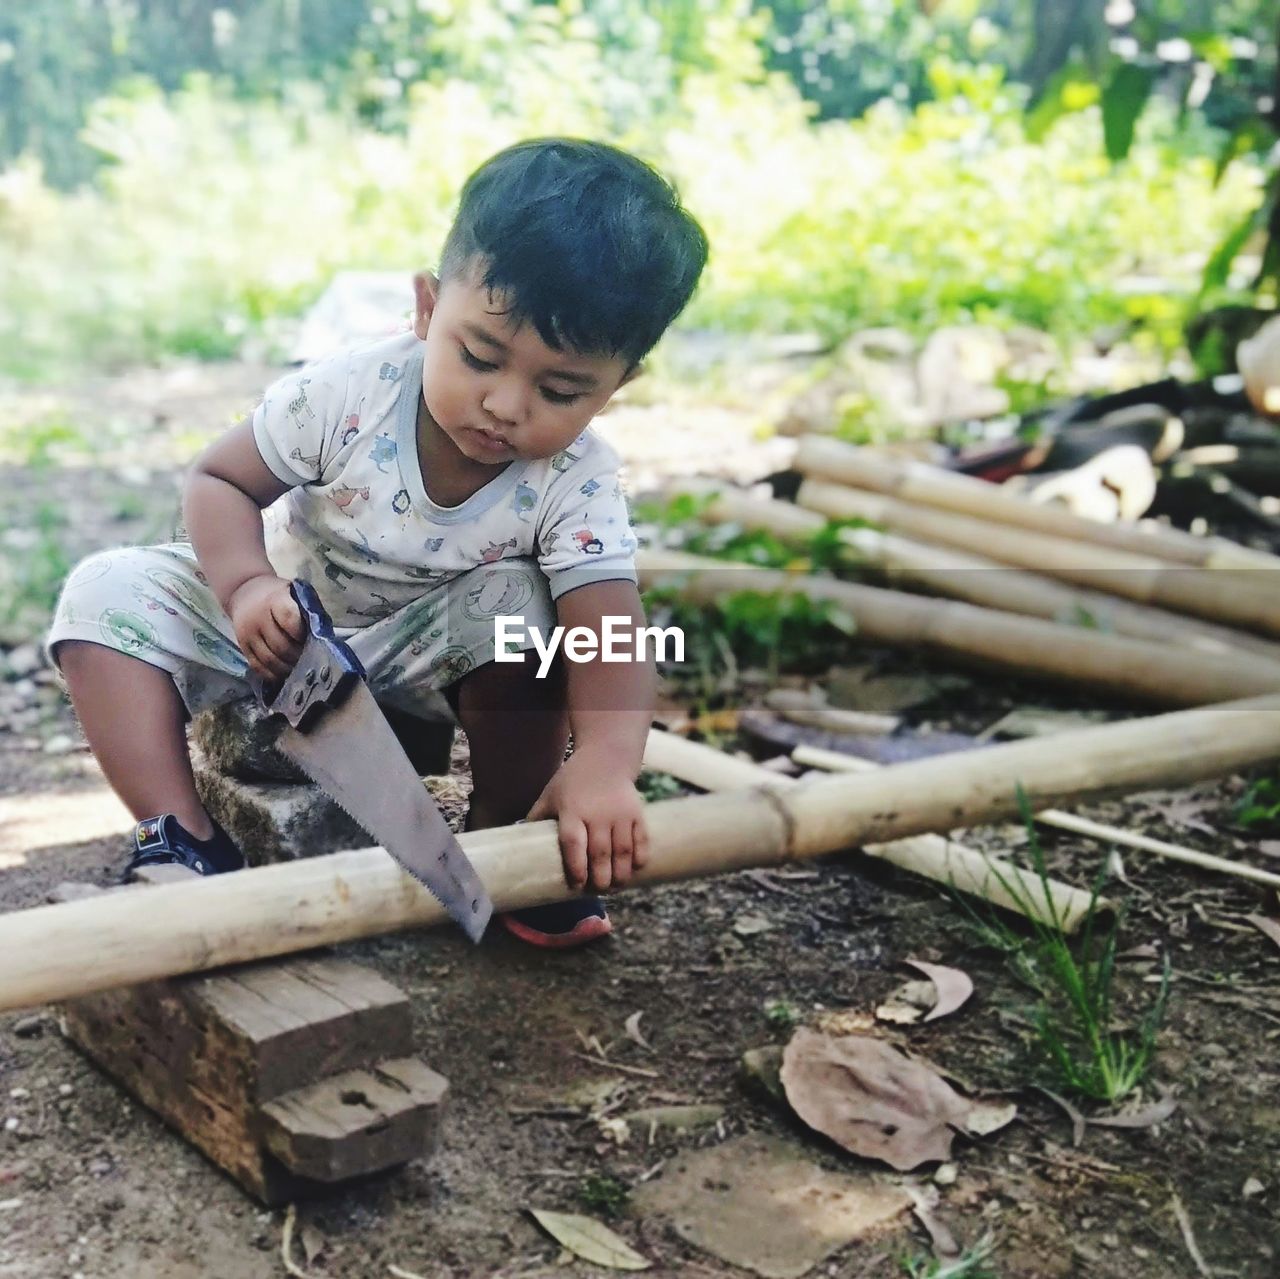 Learning to cut bamboo, he is my son